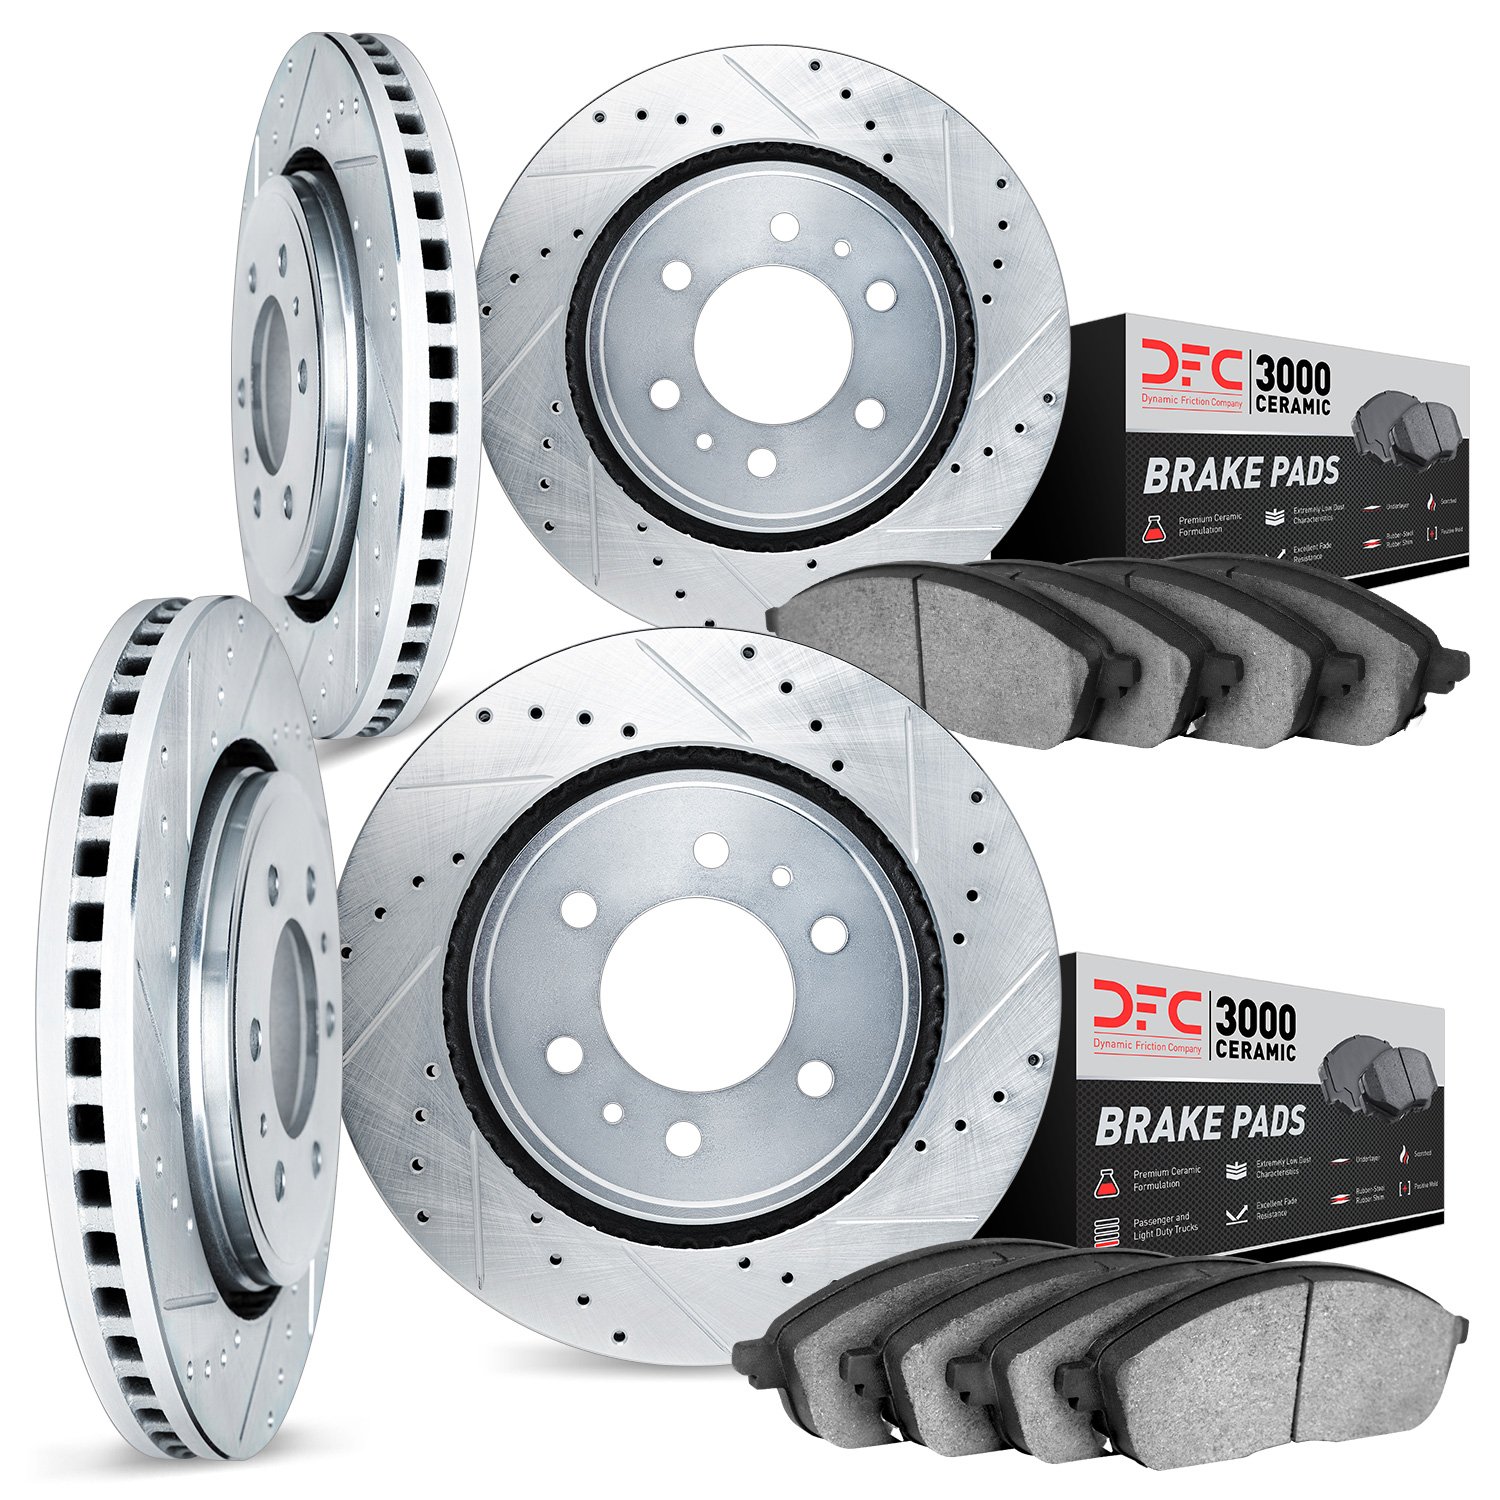 7304-76044 Drilled/Slotted Brake Rotor with 3000-Series Ceramic Brake Pads Kit [Silver], 2001-2002 Lexus/Toyota/Scion, Position: